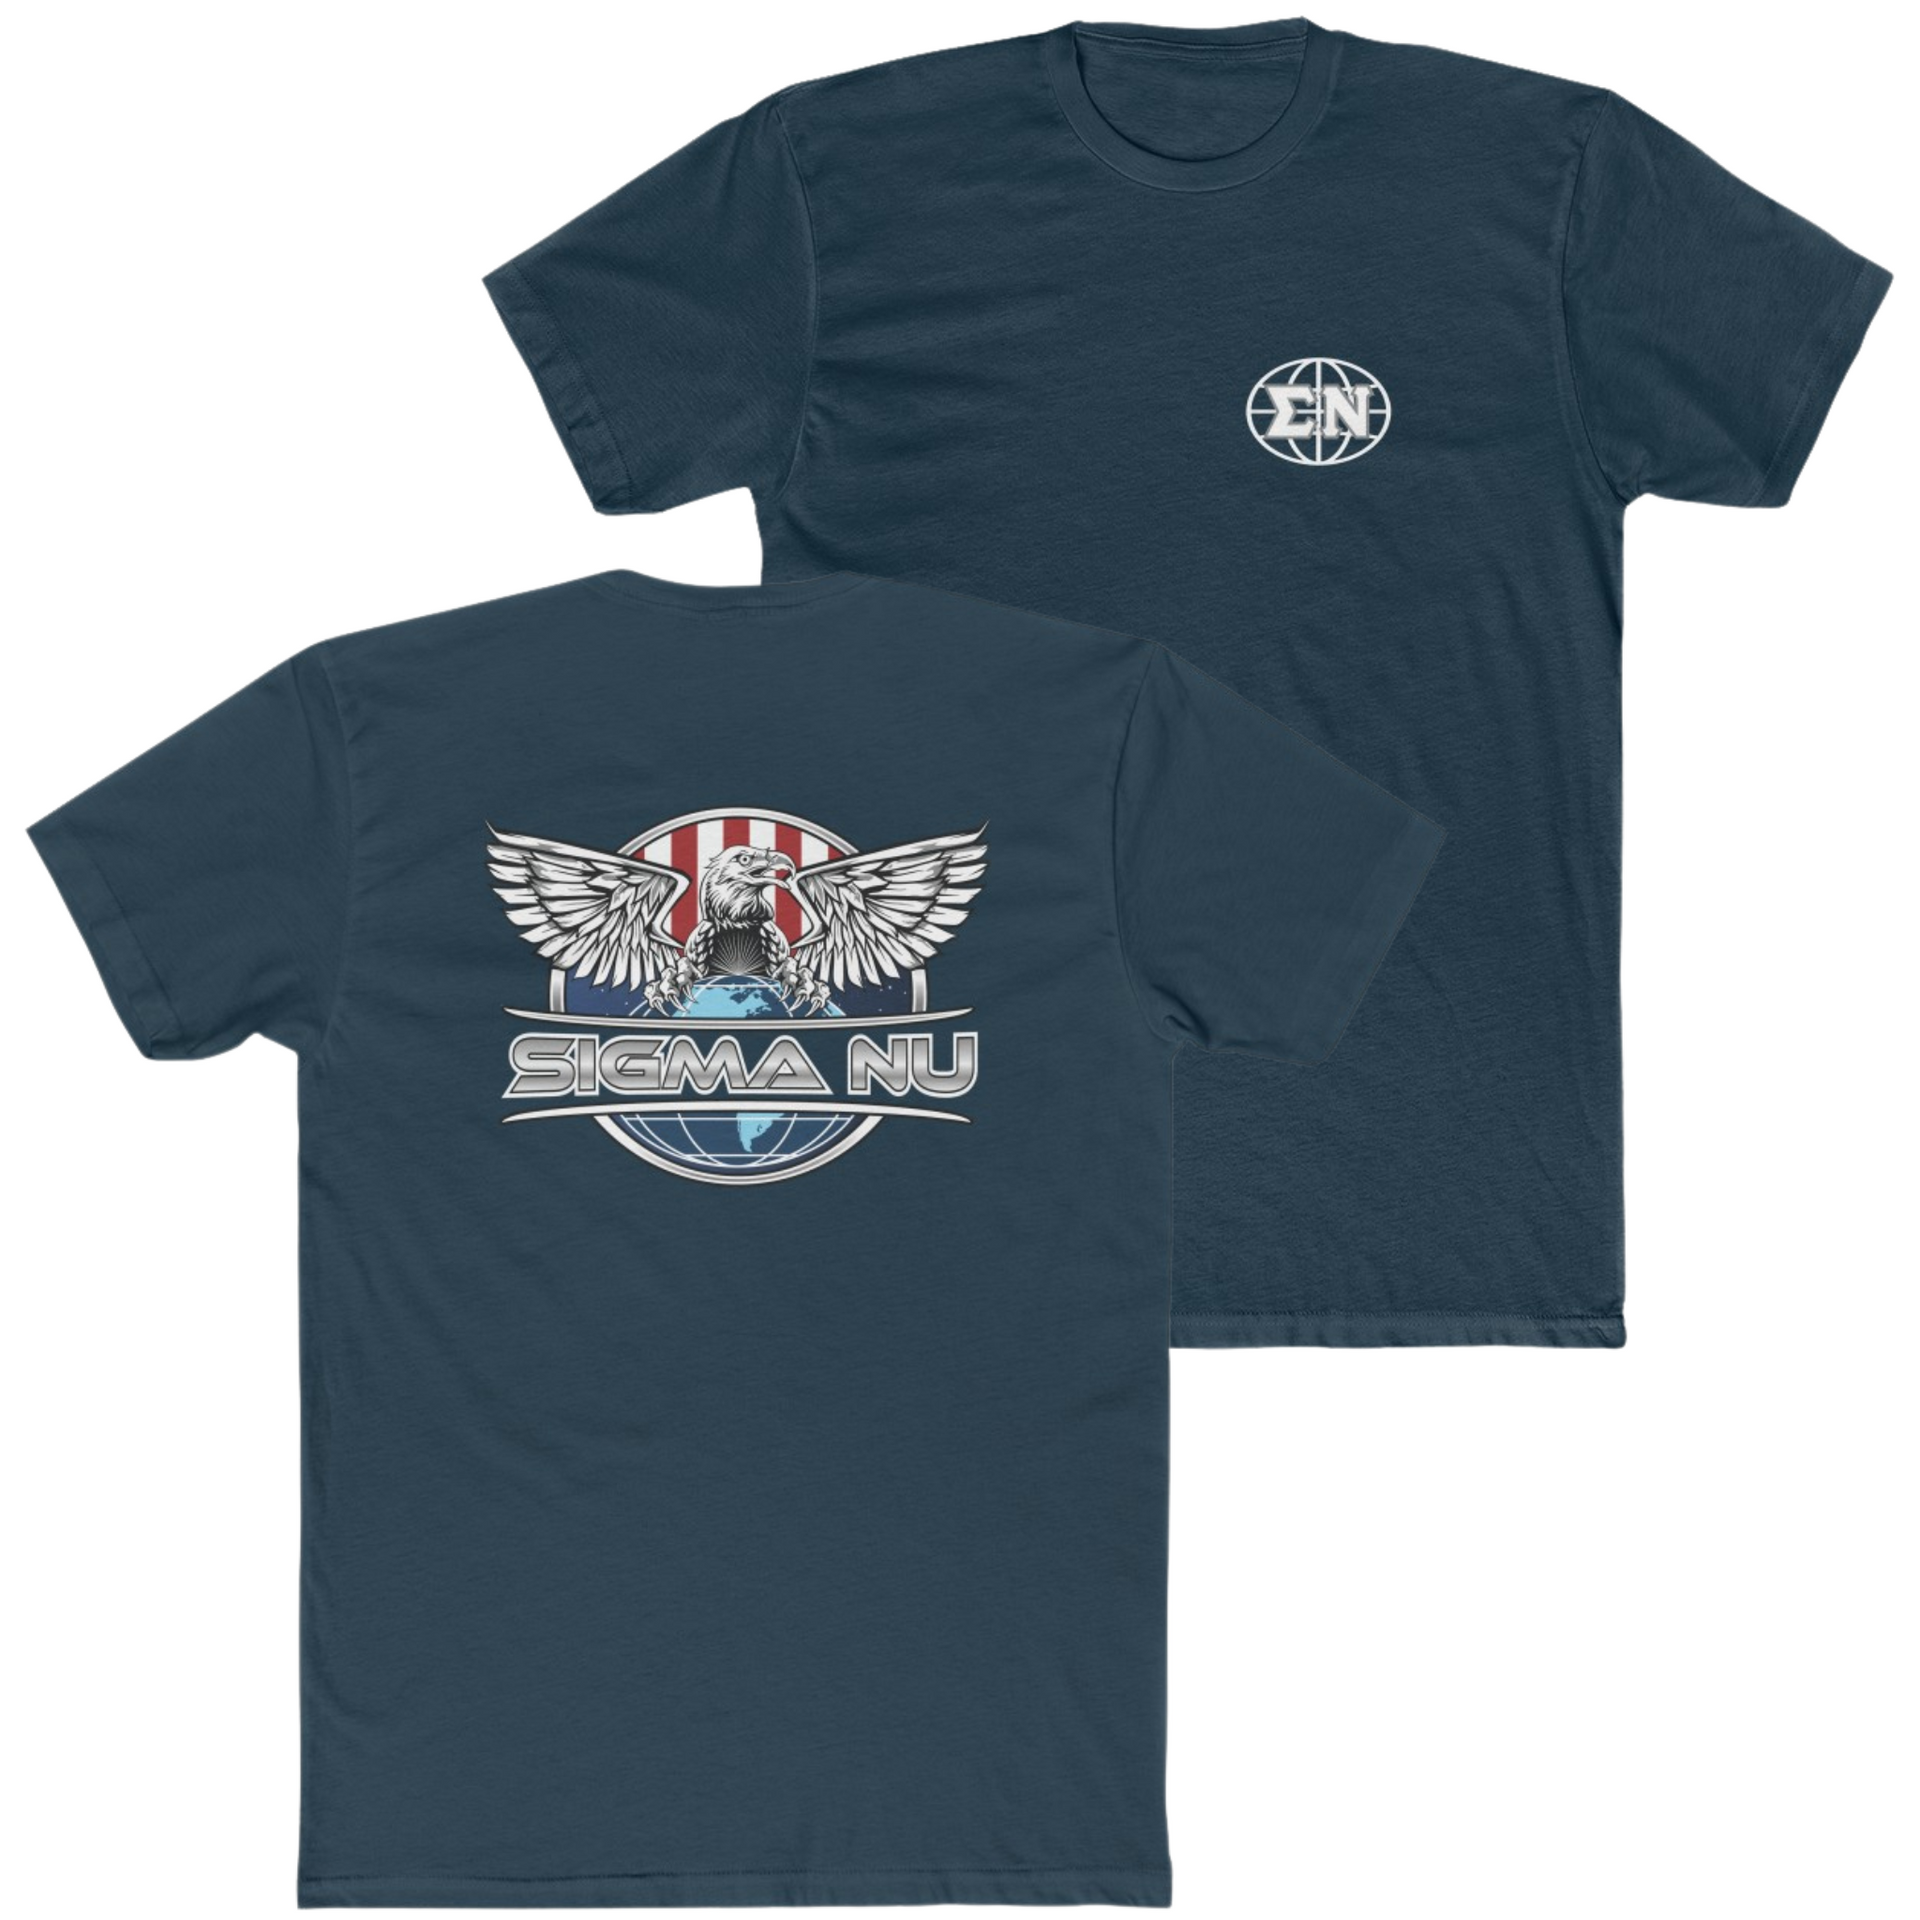 Navy Sigma Nu Graphic T-Shirt | The Fraternal Order |Sigma Nu Clothing, Apparel and Merchandise